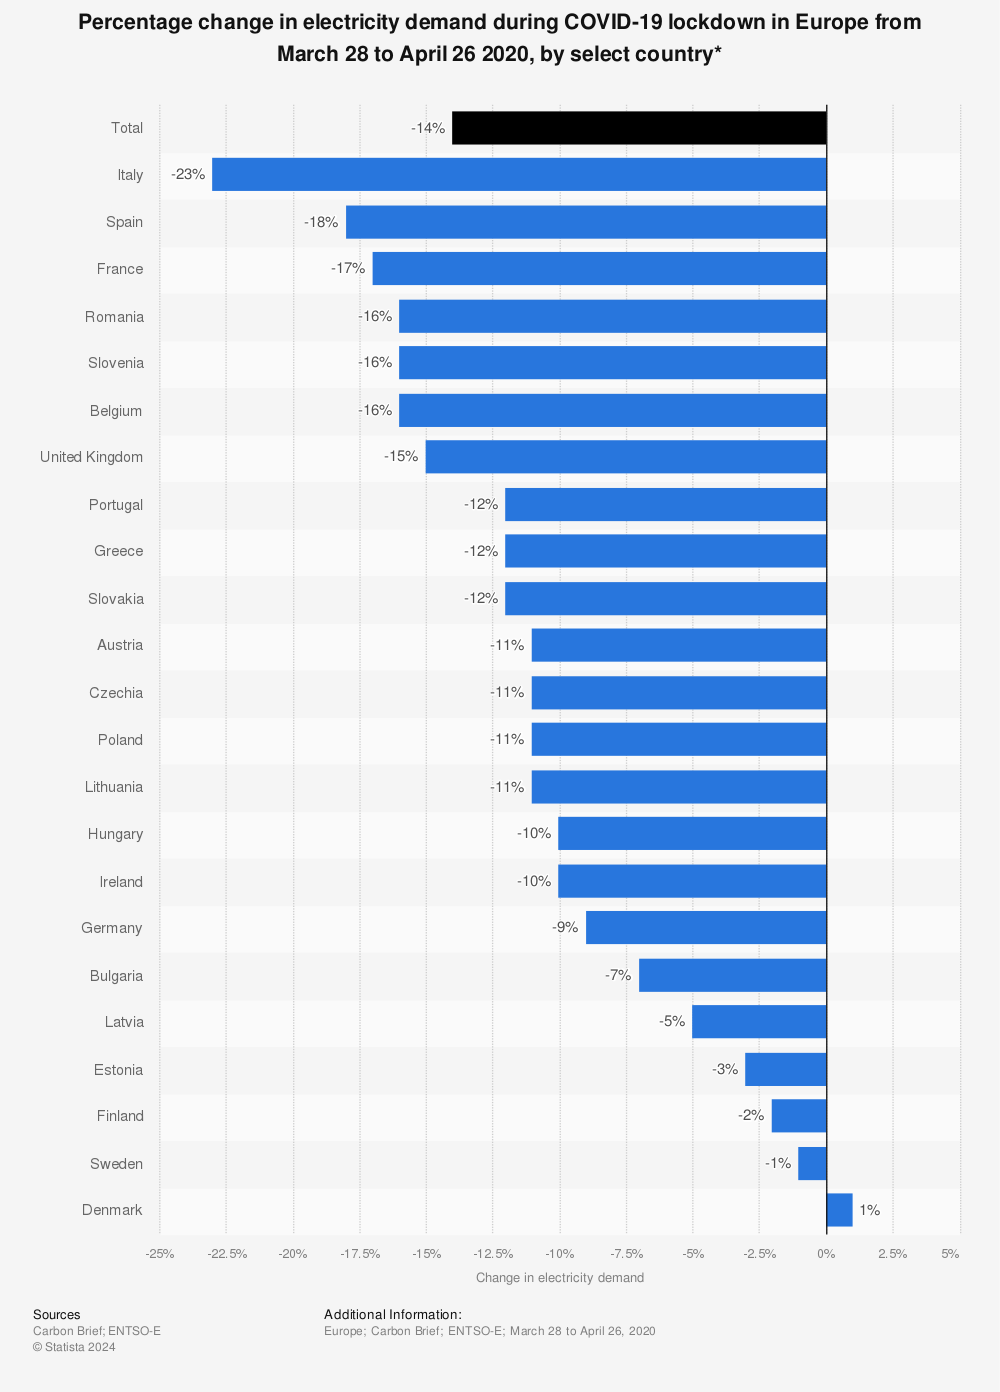 Statistic: Percentage change in electricity demand during COVID-19 lockdown in Europe from March 28 to April 26 2020, by select country* | Statista